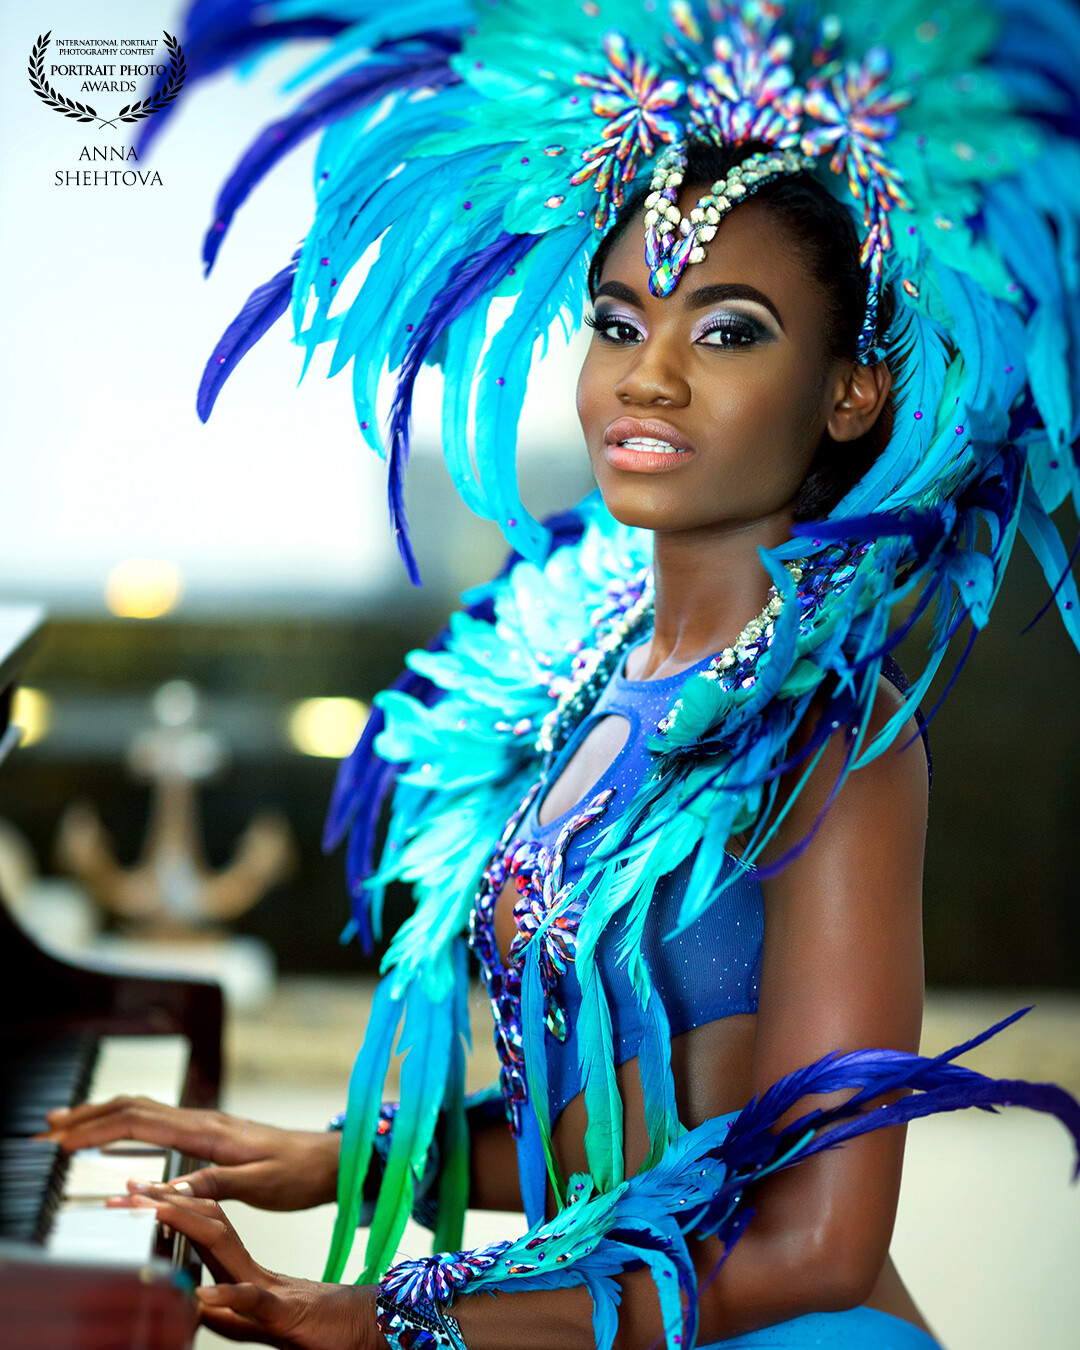 Music, bright colours, passion , cheerful people dressed in lavish costumes , longing to share their happiness with locals and tourists , enjoying life and spreading joy and love - that's what the Caribbean carnival looks like.